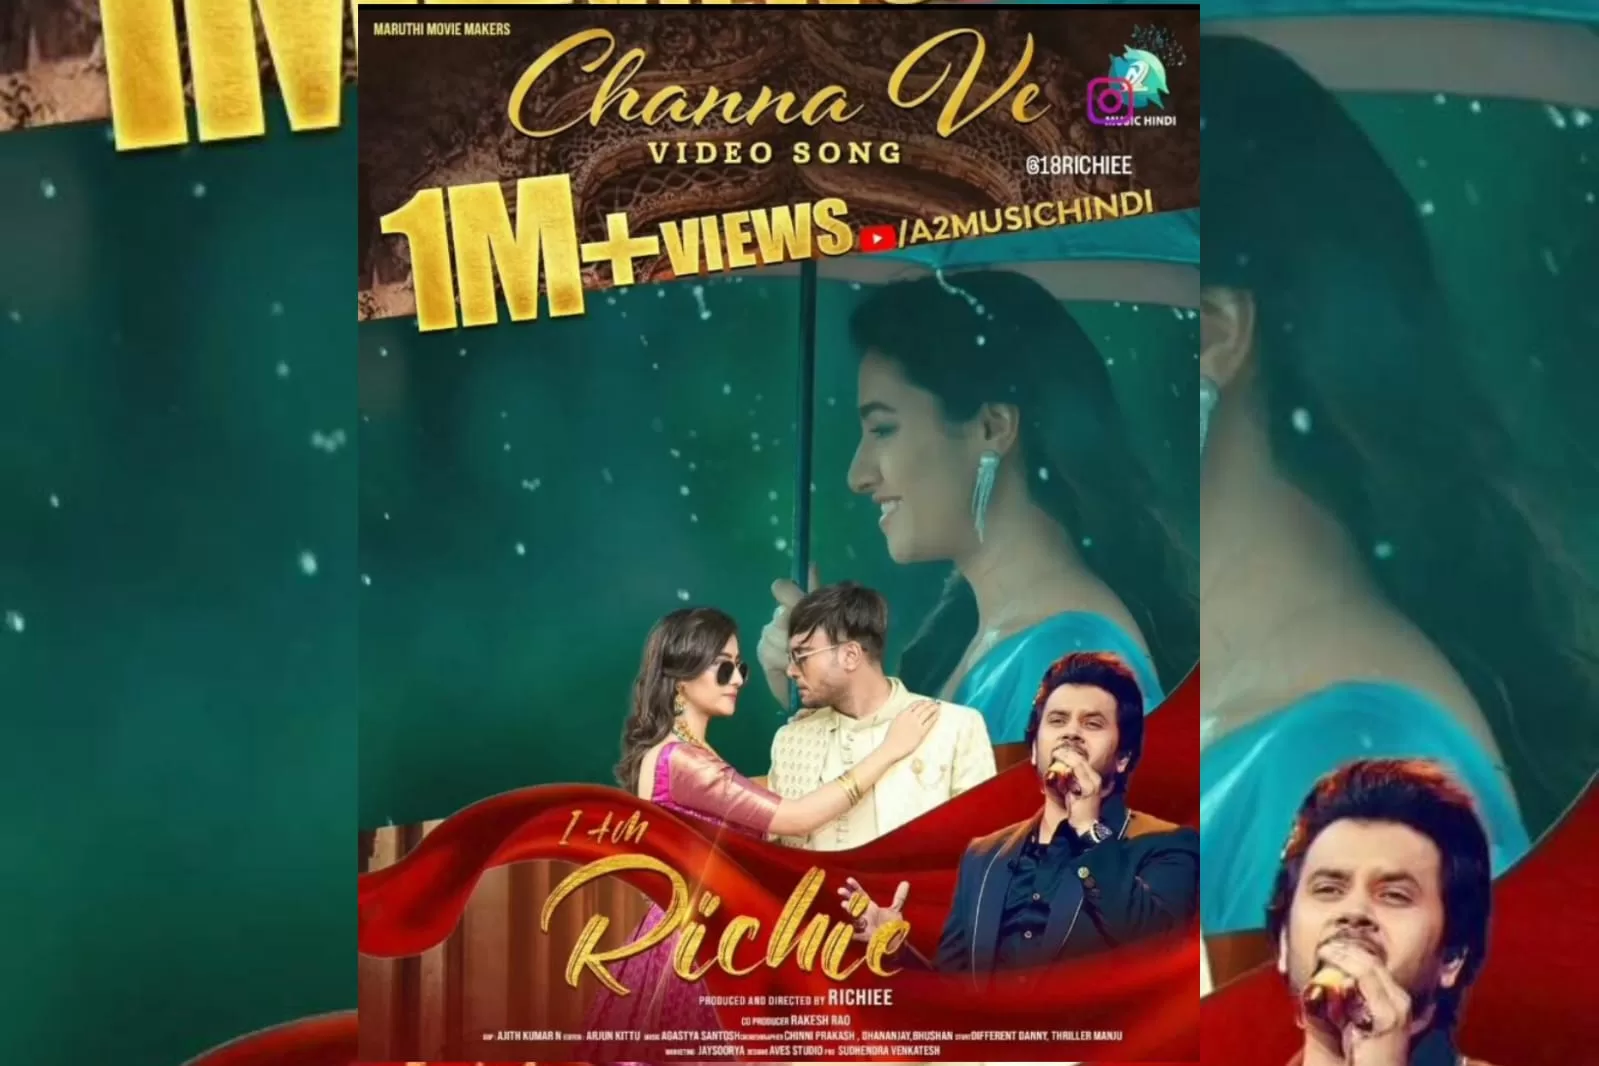 Channa Ve Song sung by Javed Ali from Richie film is an instant chartbuster